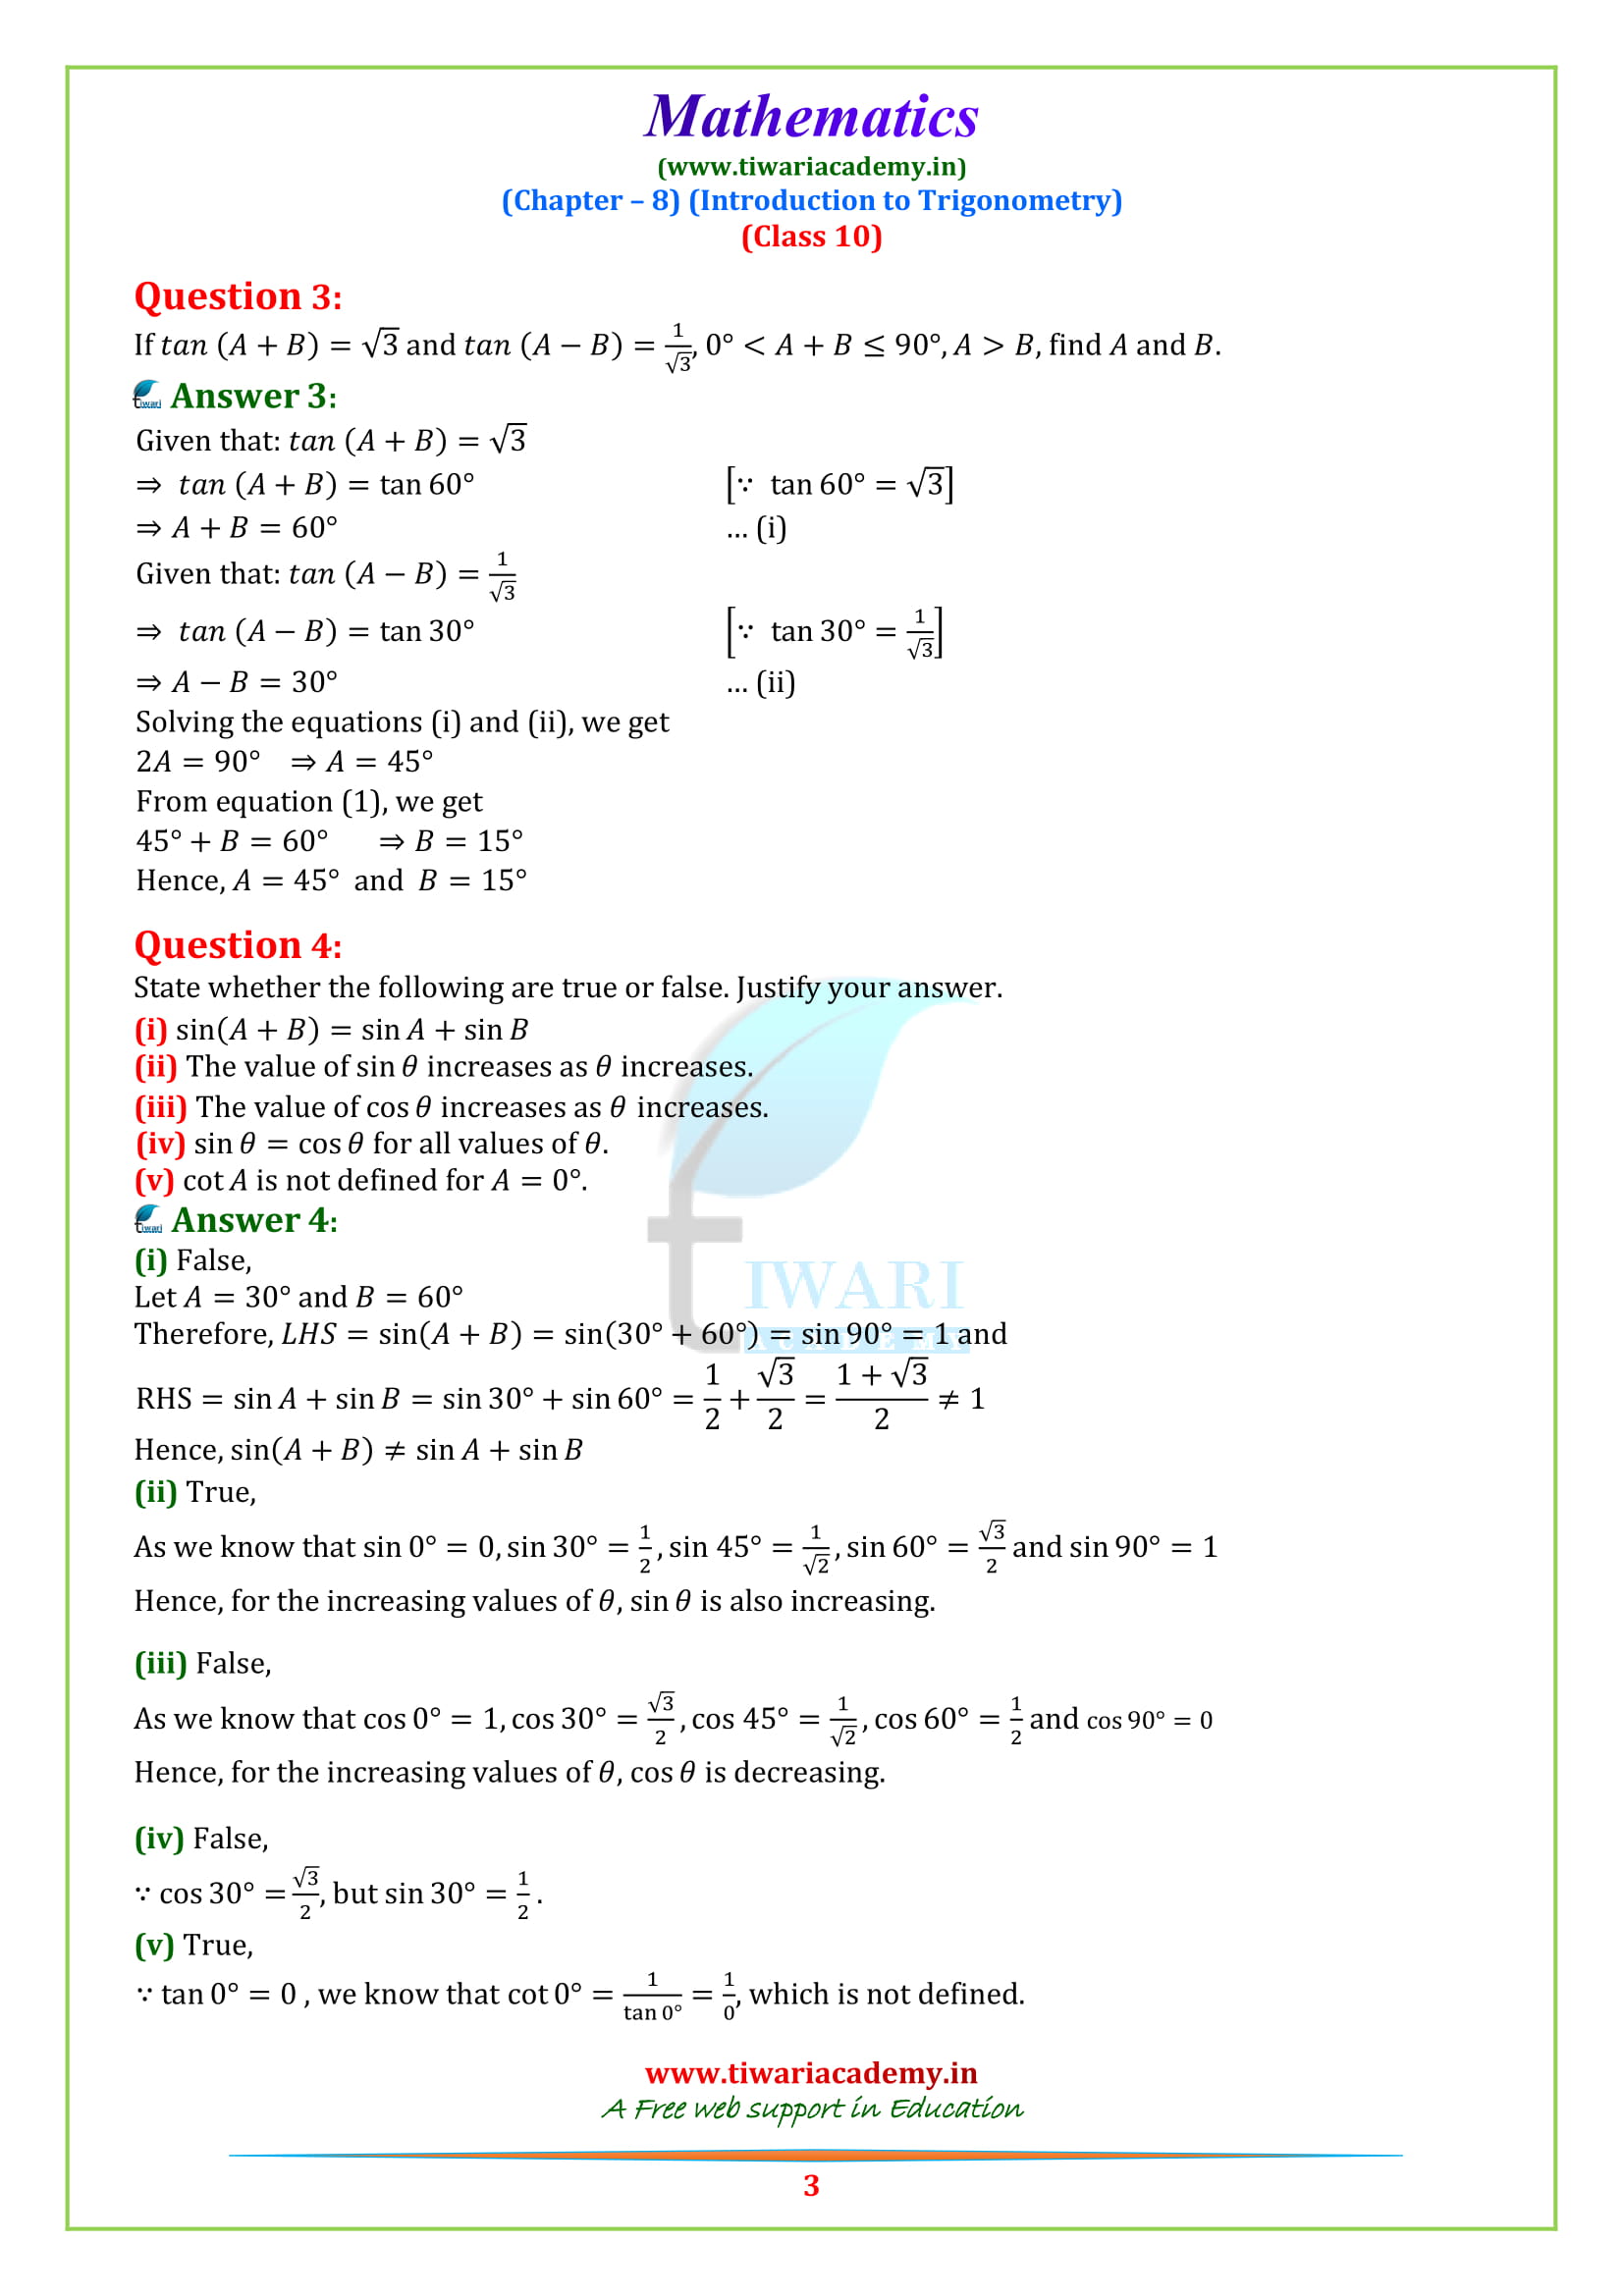 case study questions for class 10 maths chapter 8